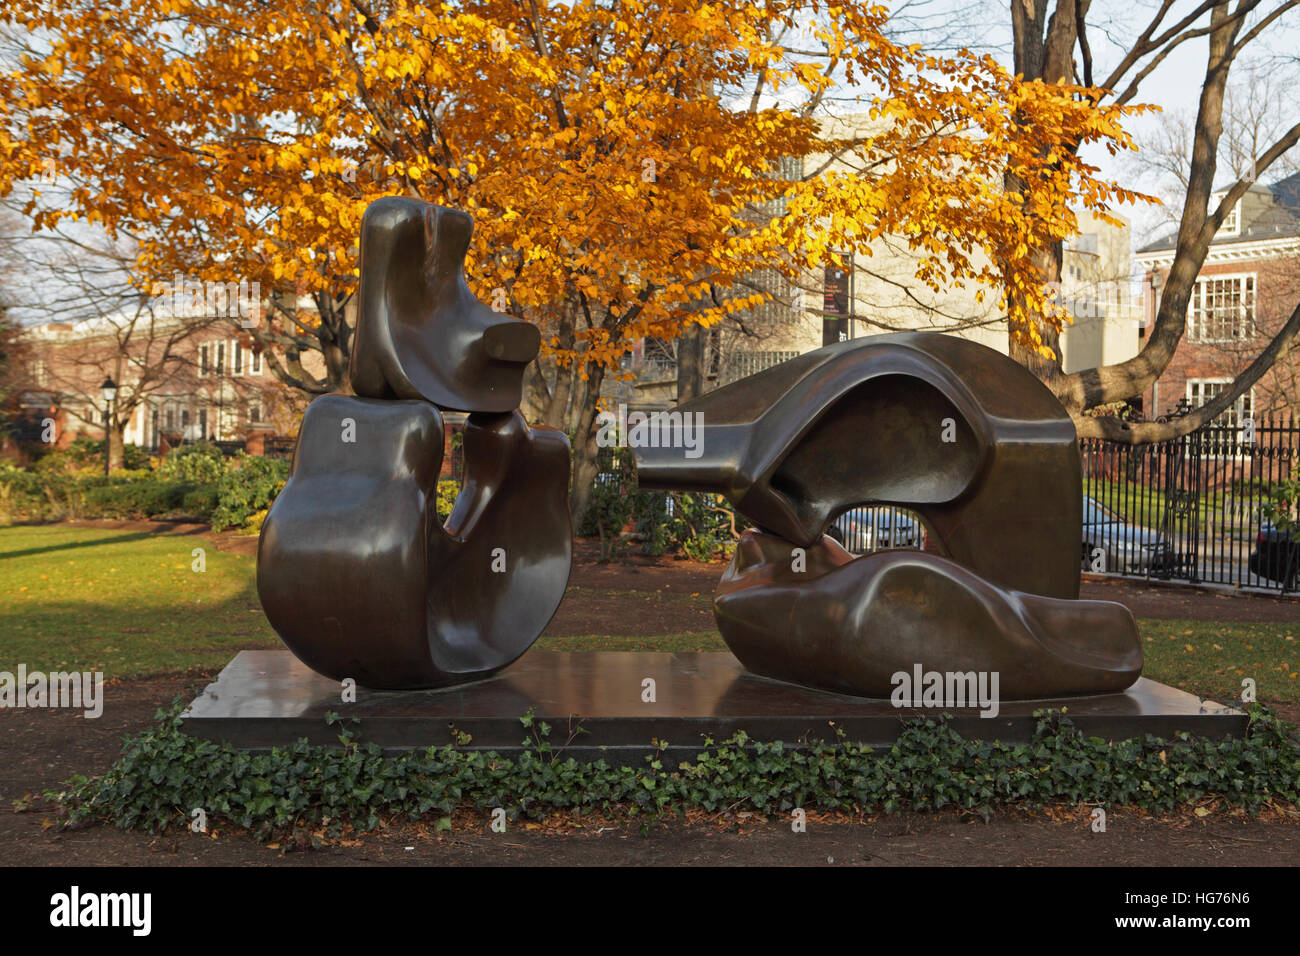 Harvard University campus on an autumn morning. Statue by Henry Moore entitled Four Piece Reclining Figure outside the Lamont Library. Stock Photo